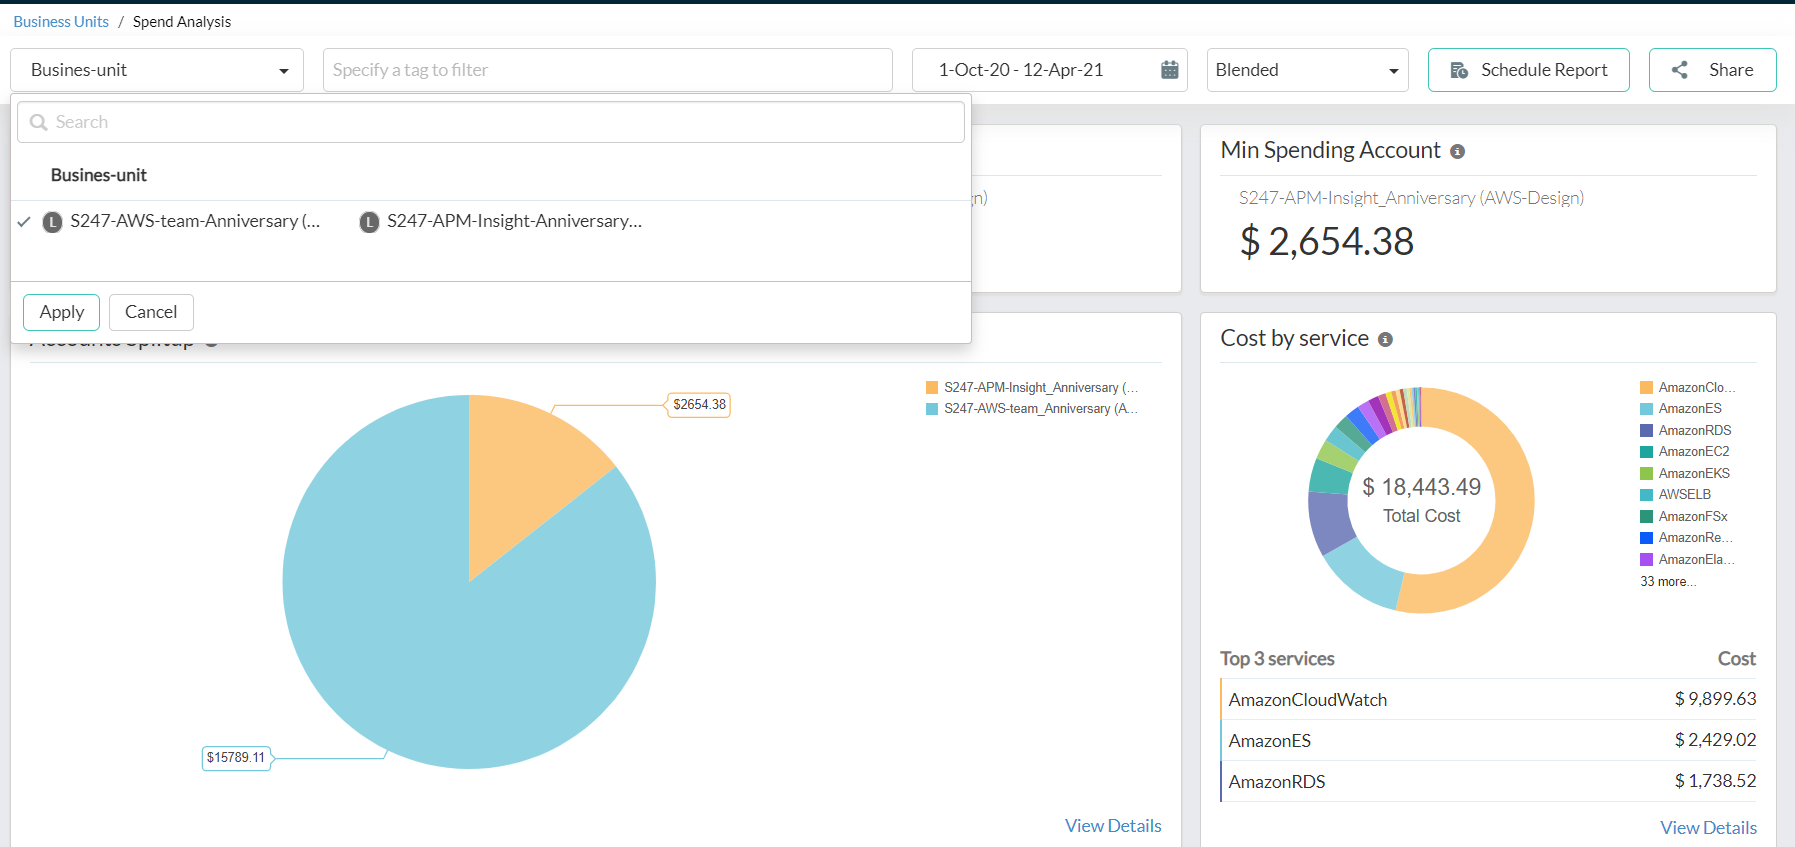 Select specific accounts from BU Spend Analysis to share reports.